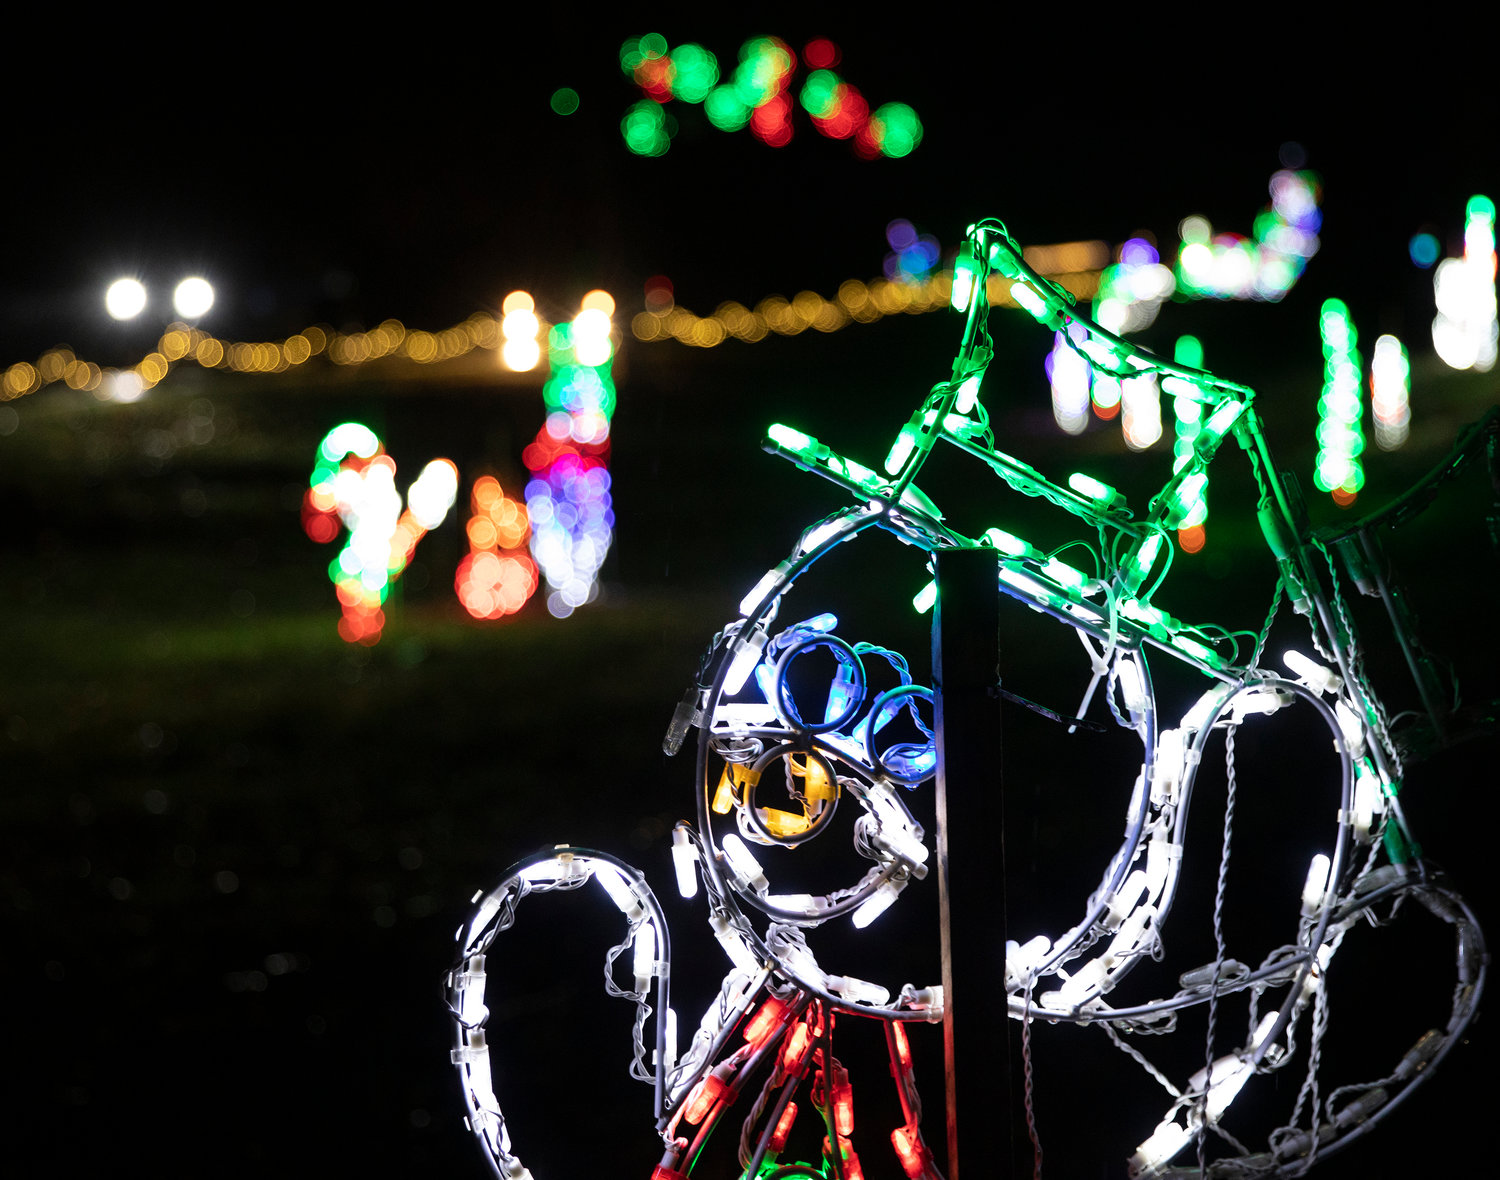 Christmas lights illuminate Fort Borst Park as cars drive through to view the display in December 2022.